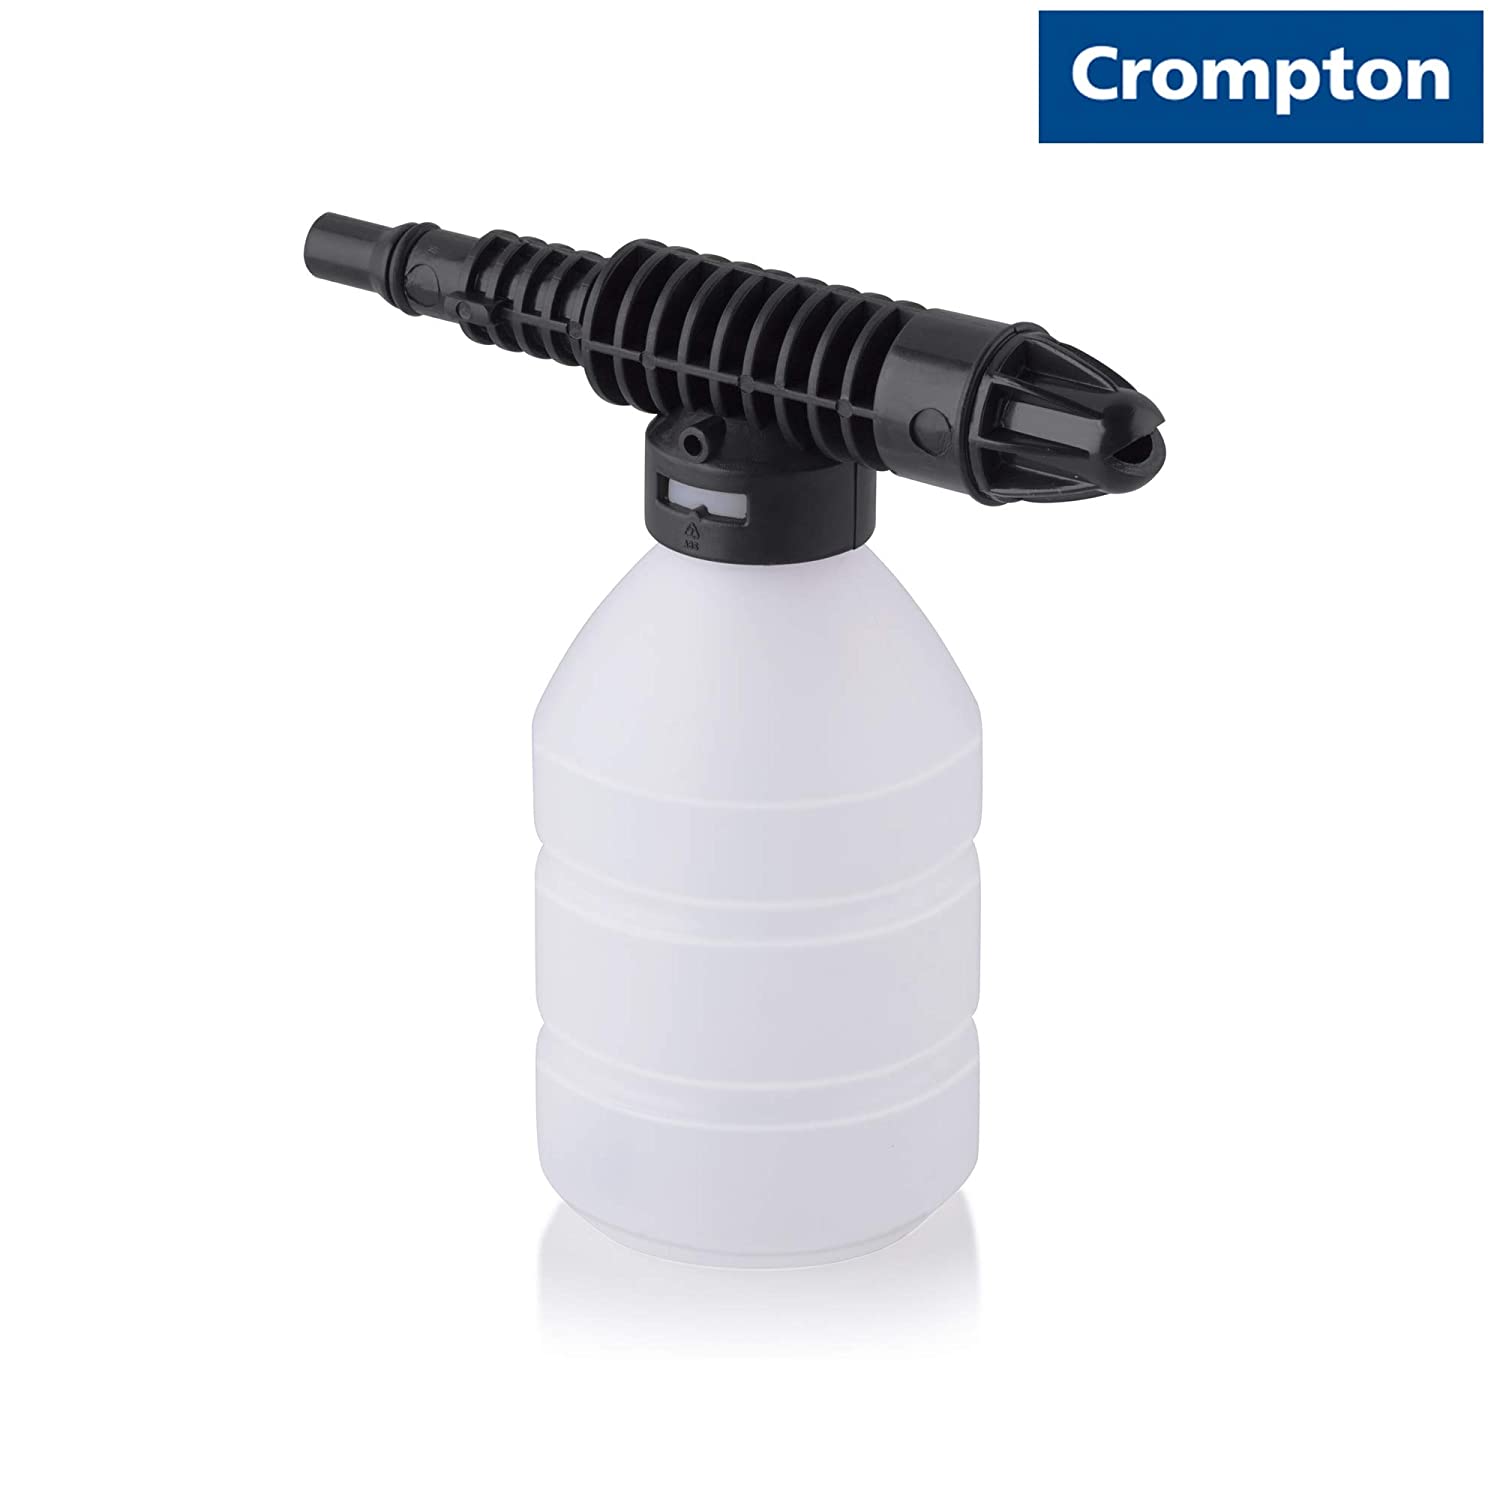 Crompton CPW 70 Surface Domestic Single Phase Pressure Pump